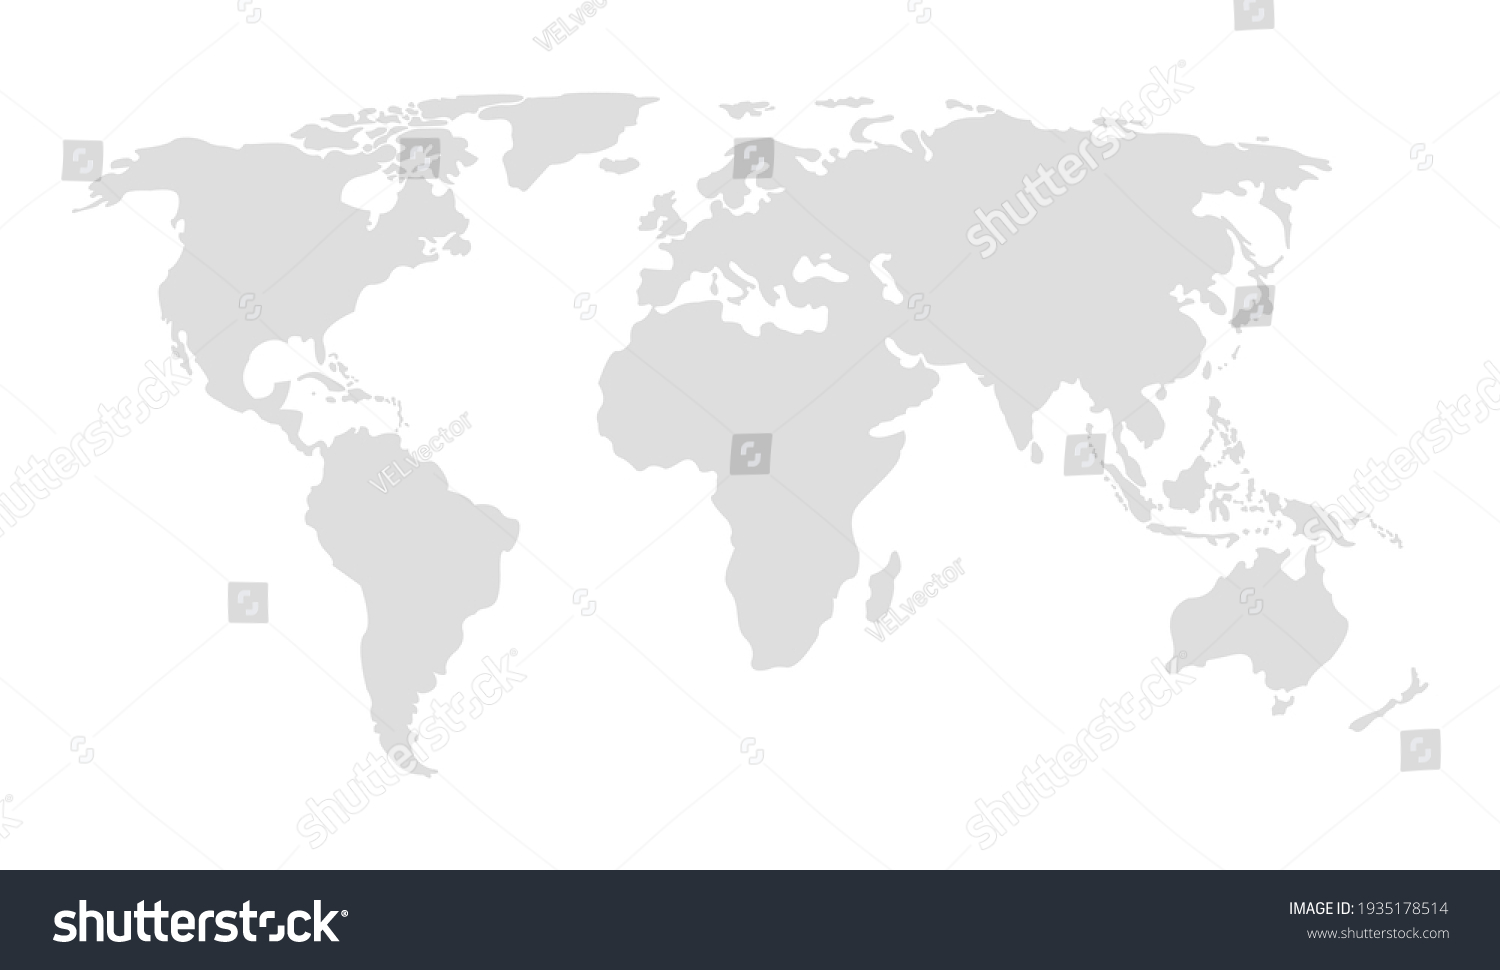 Gray blank vector map of the world isolated on white background. Flat Earth, Globe worldmap icon. #1935178514